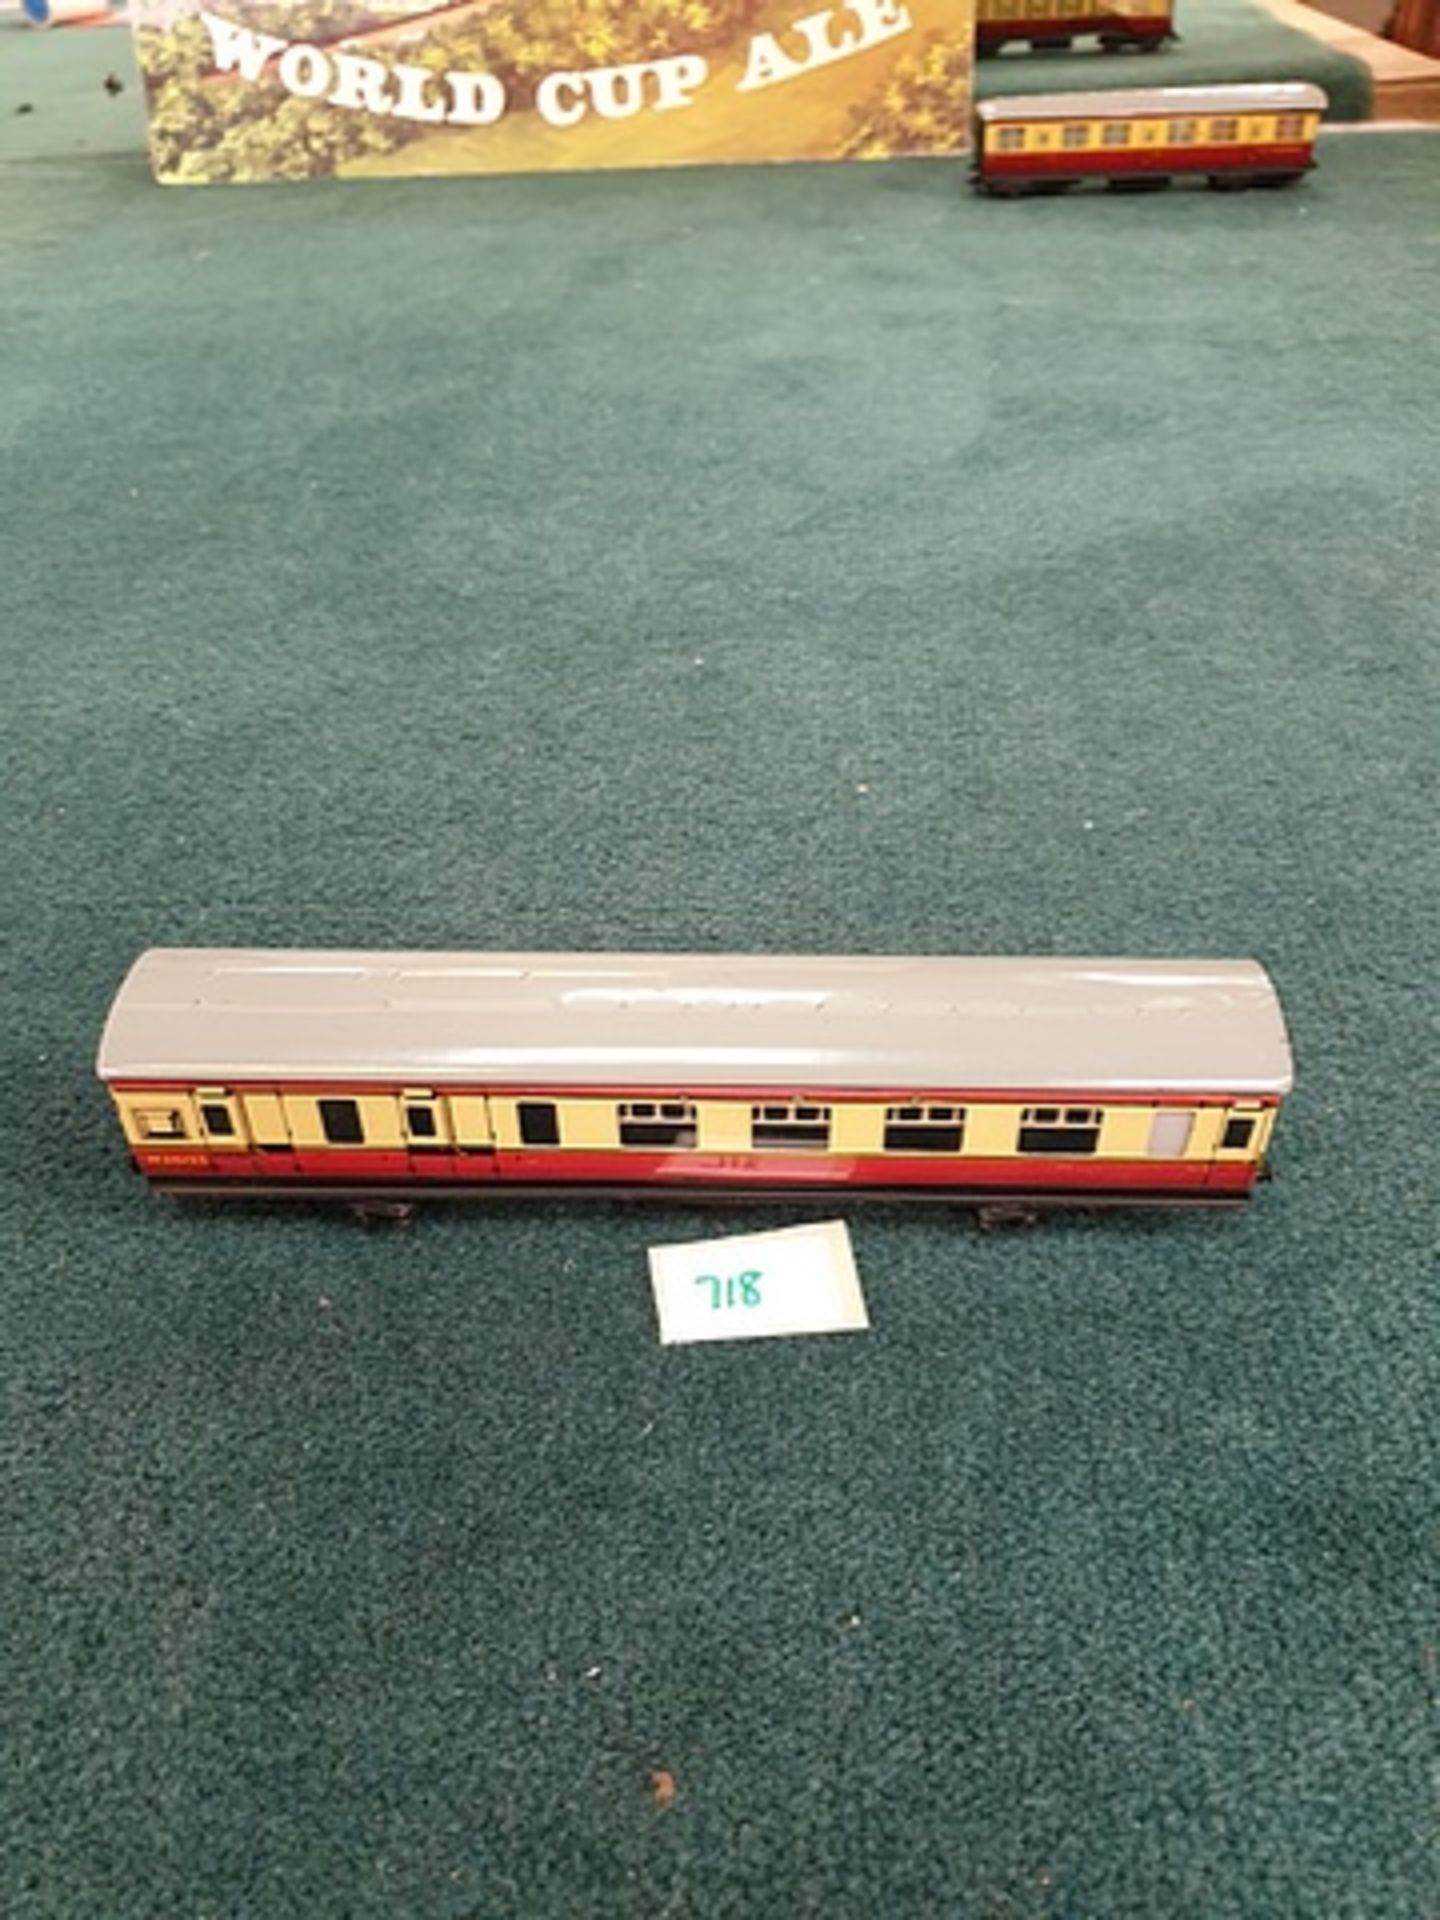 Hornby Dublo passenger Carriage - Carriage number M26133